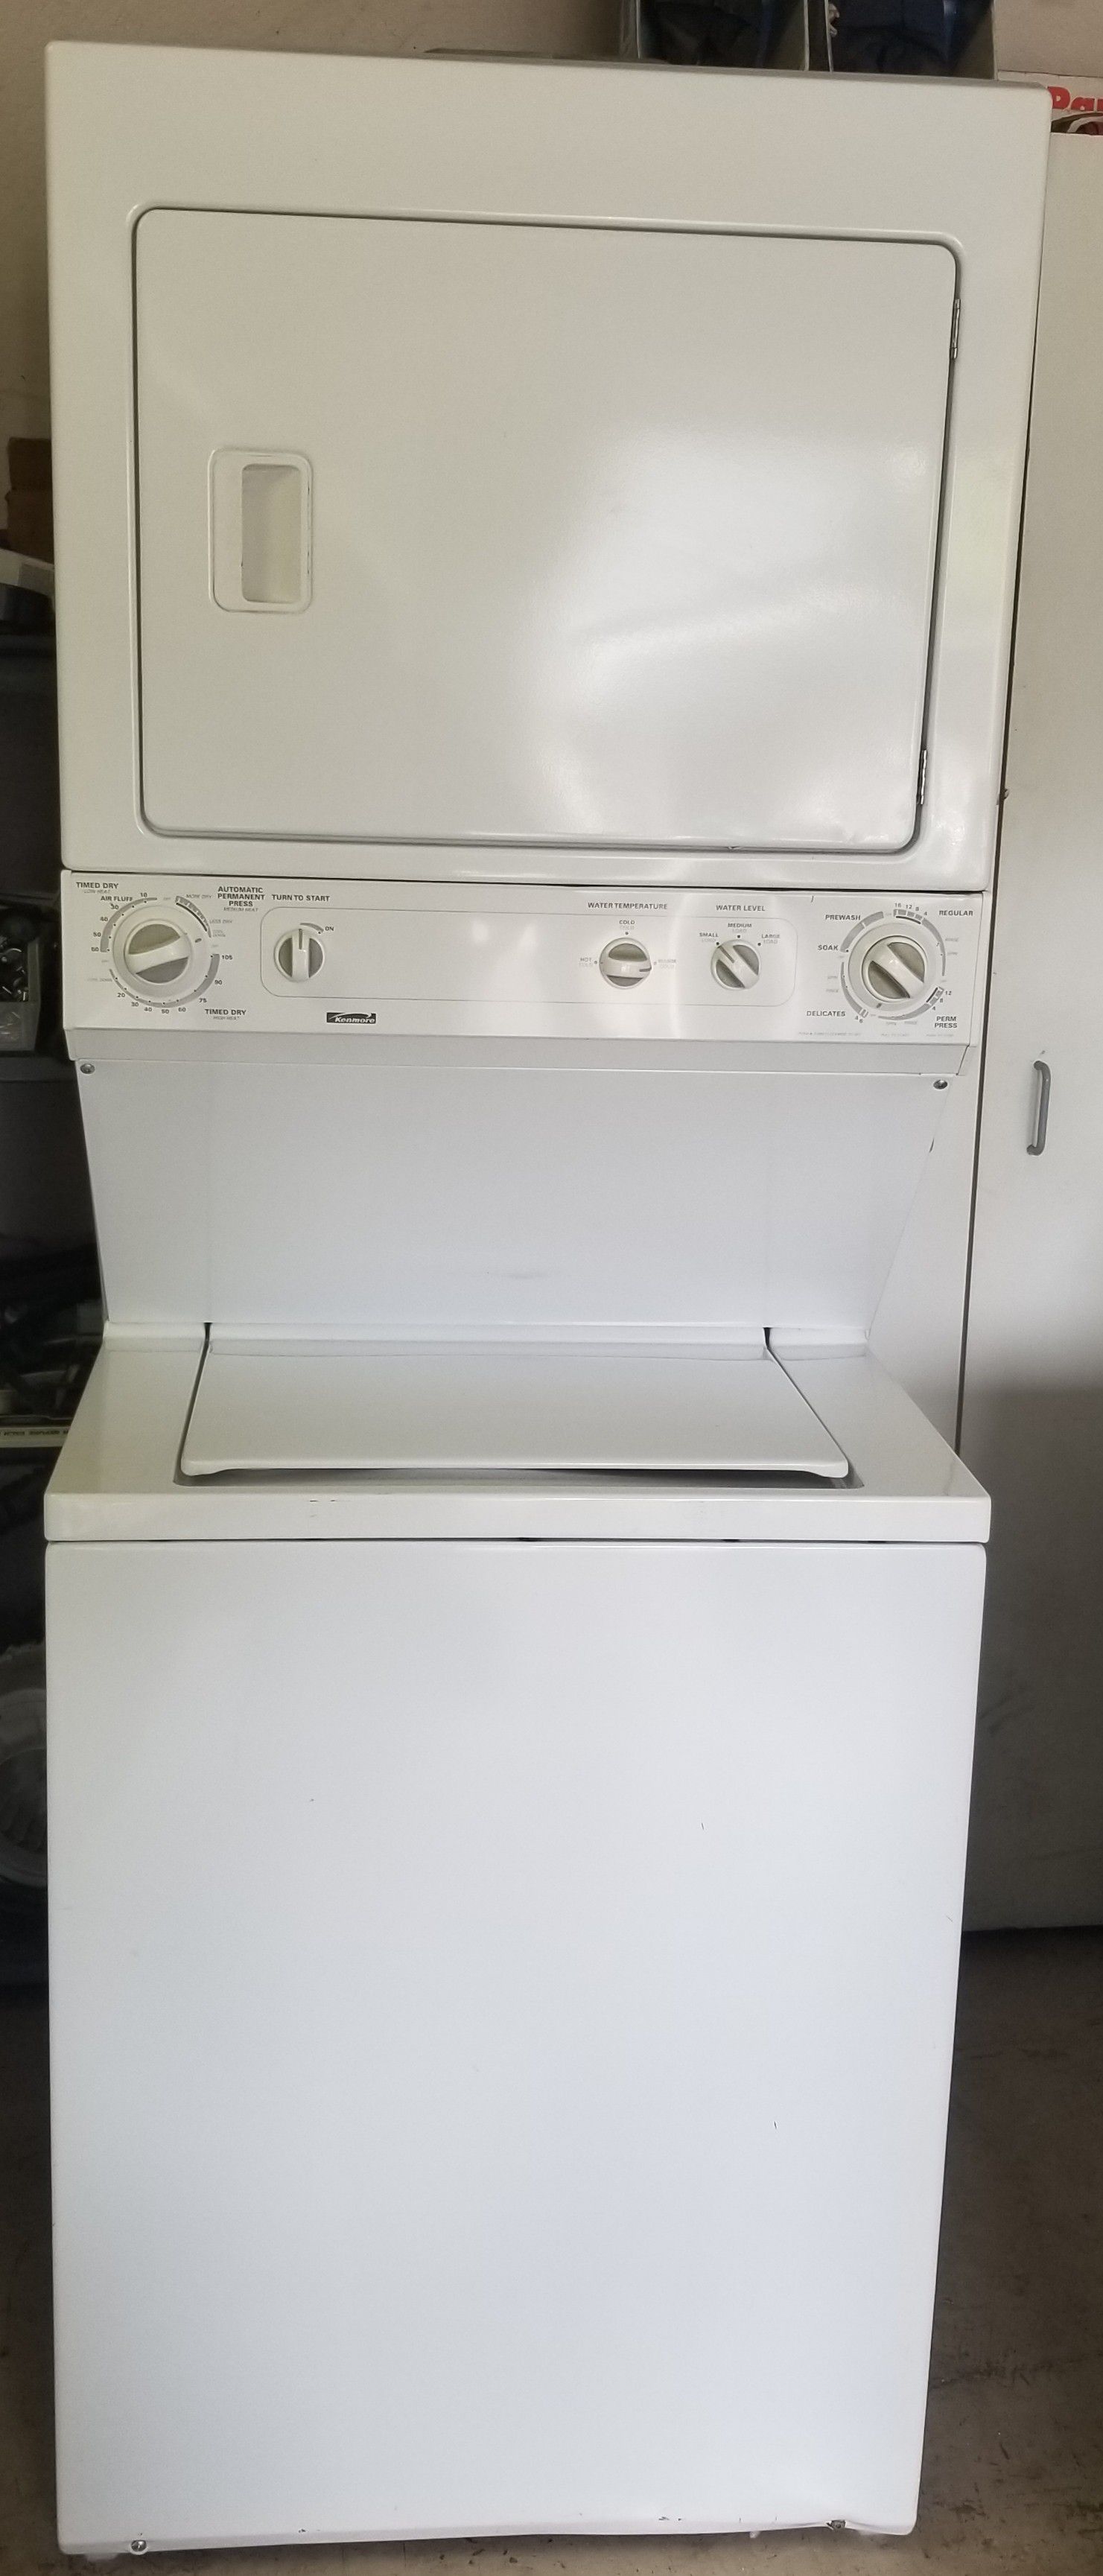 Kenmore washer and electric dryer combo heavy duty super capacity works great